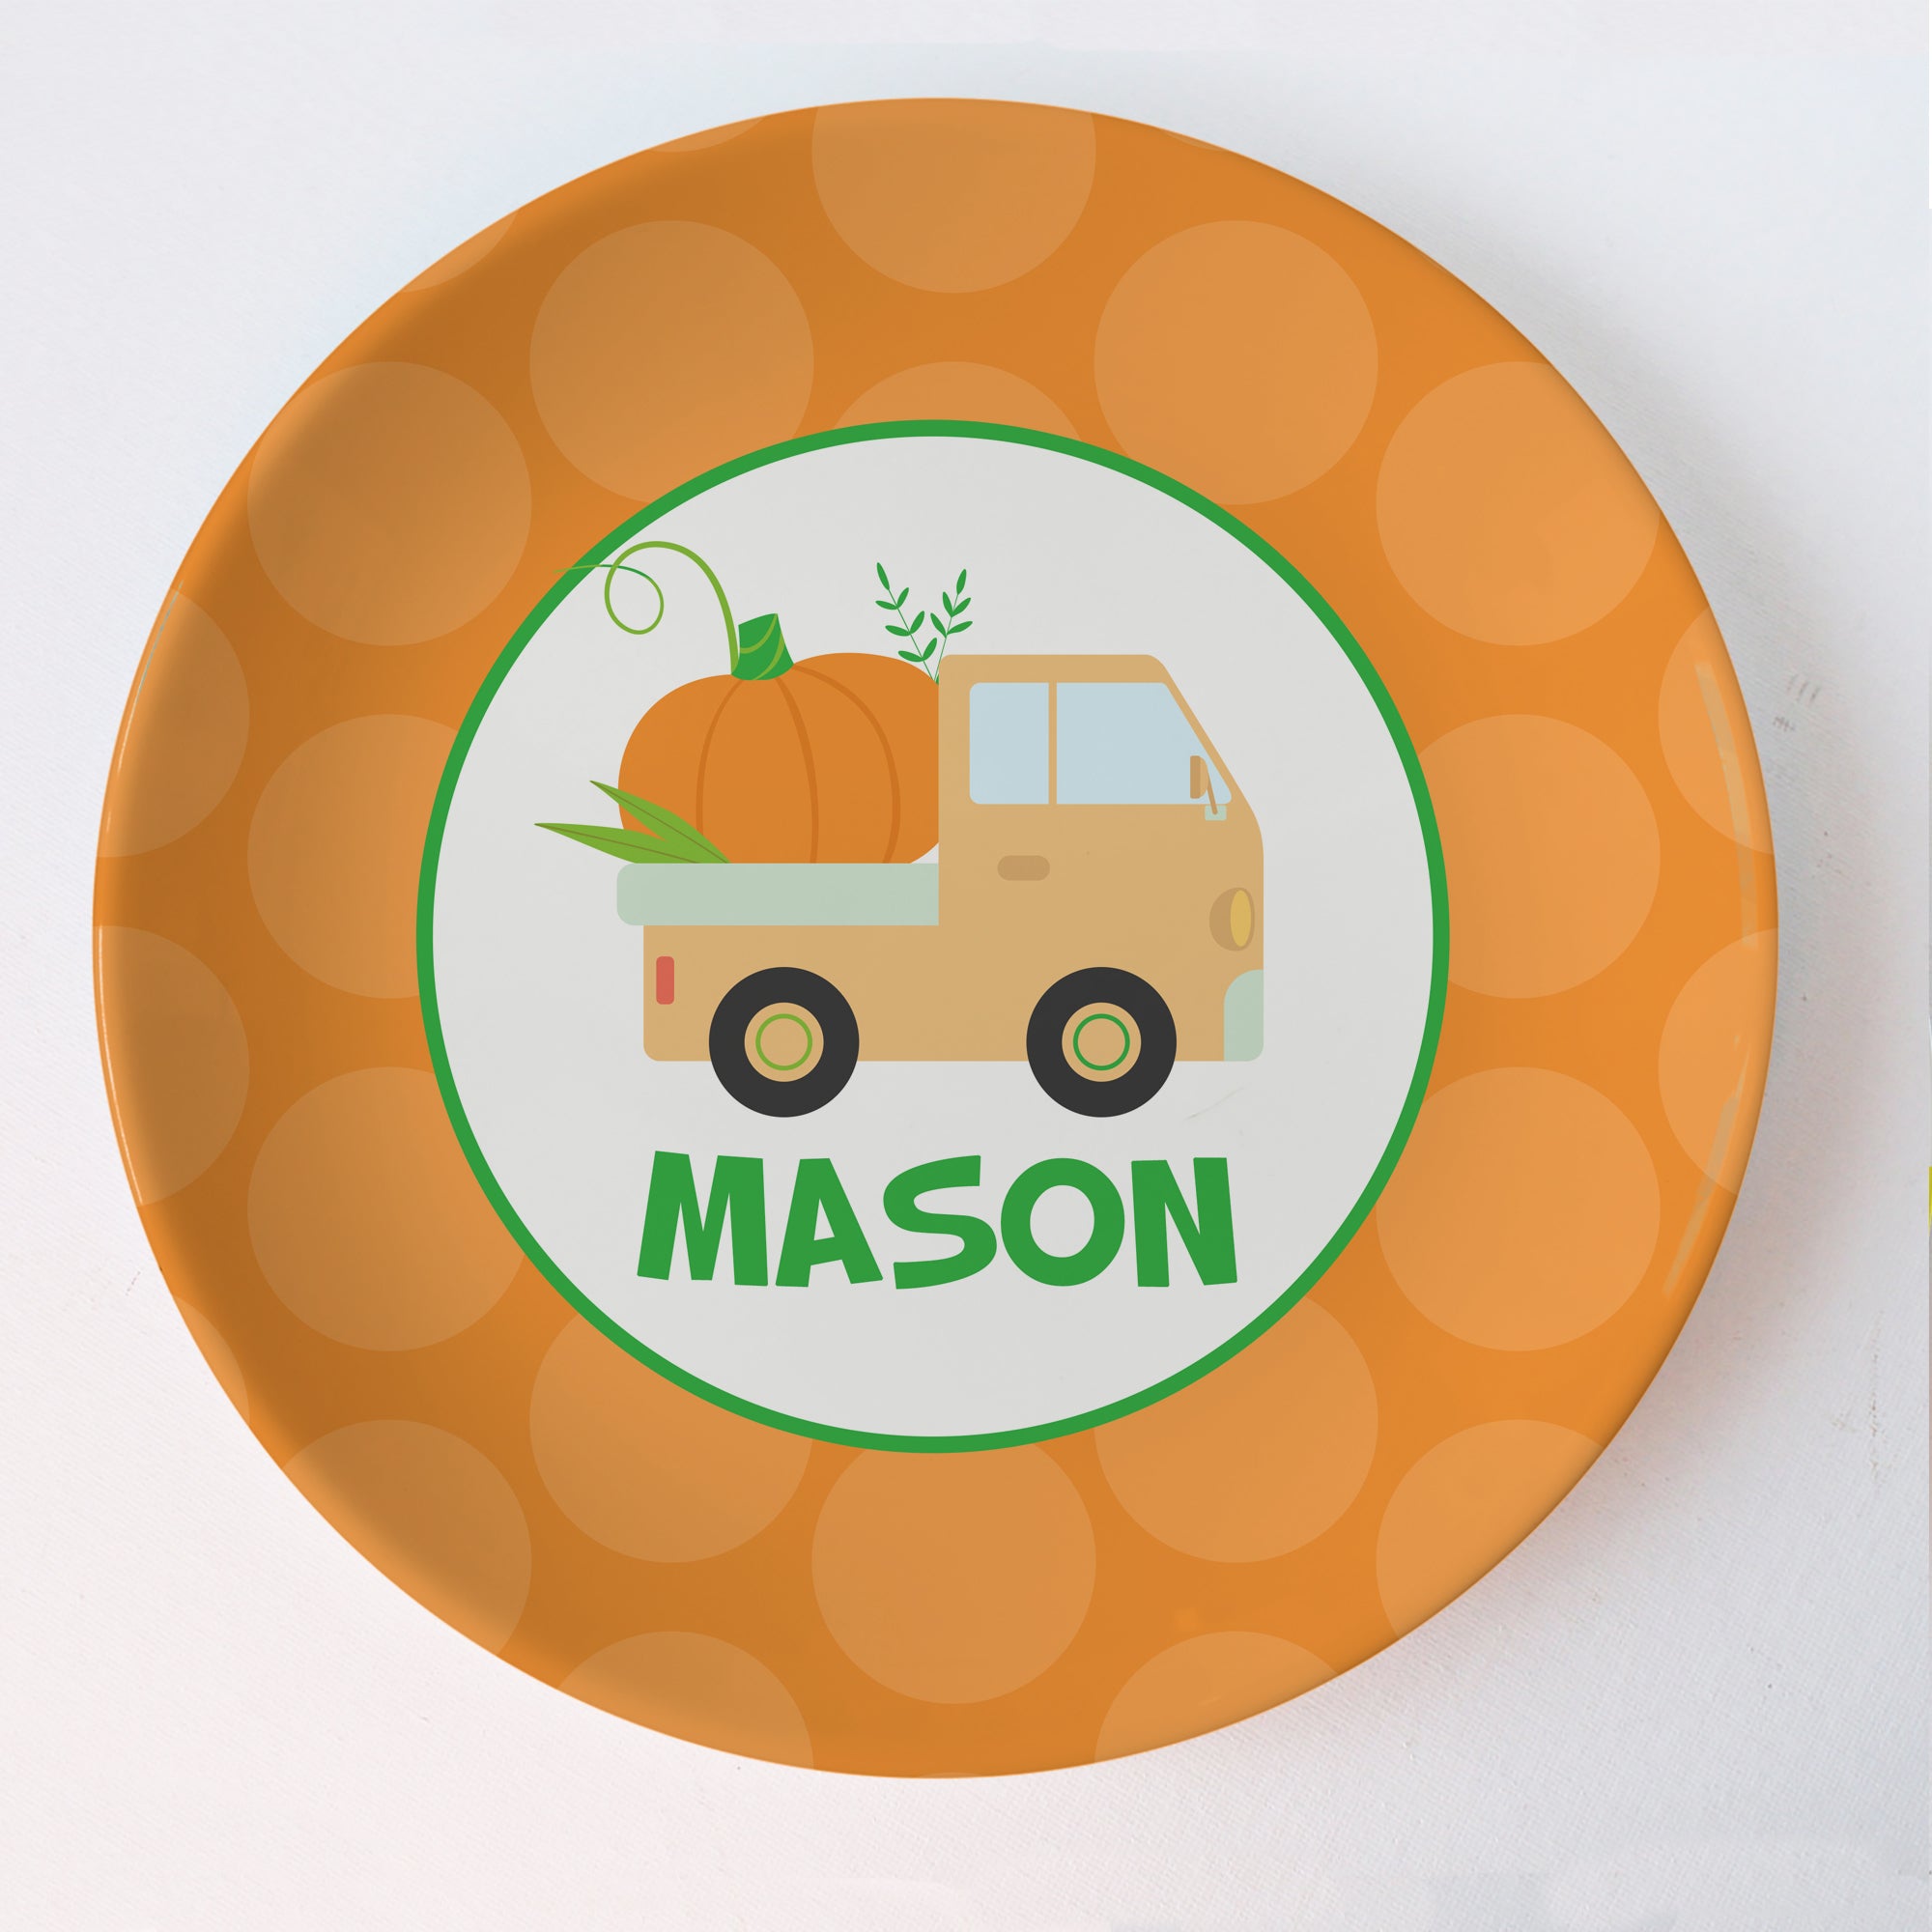 Personalized Halloween Plate, Thermosaf Polymer (no bpa, melamine or formaldehyde), Polka dots, Oven and dishwasher safe, lasts for years, PIPSY.COM